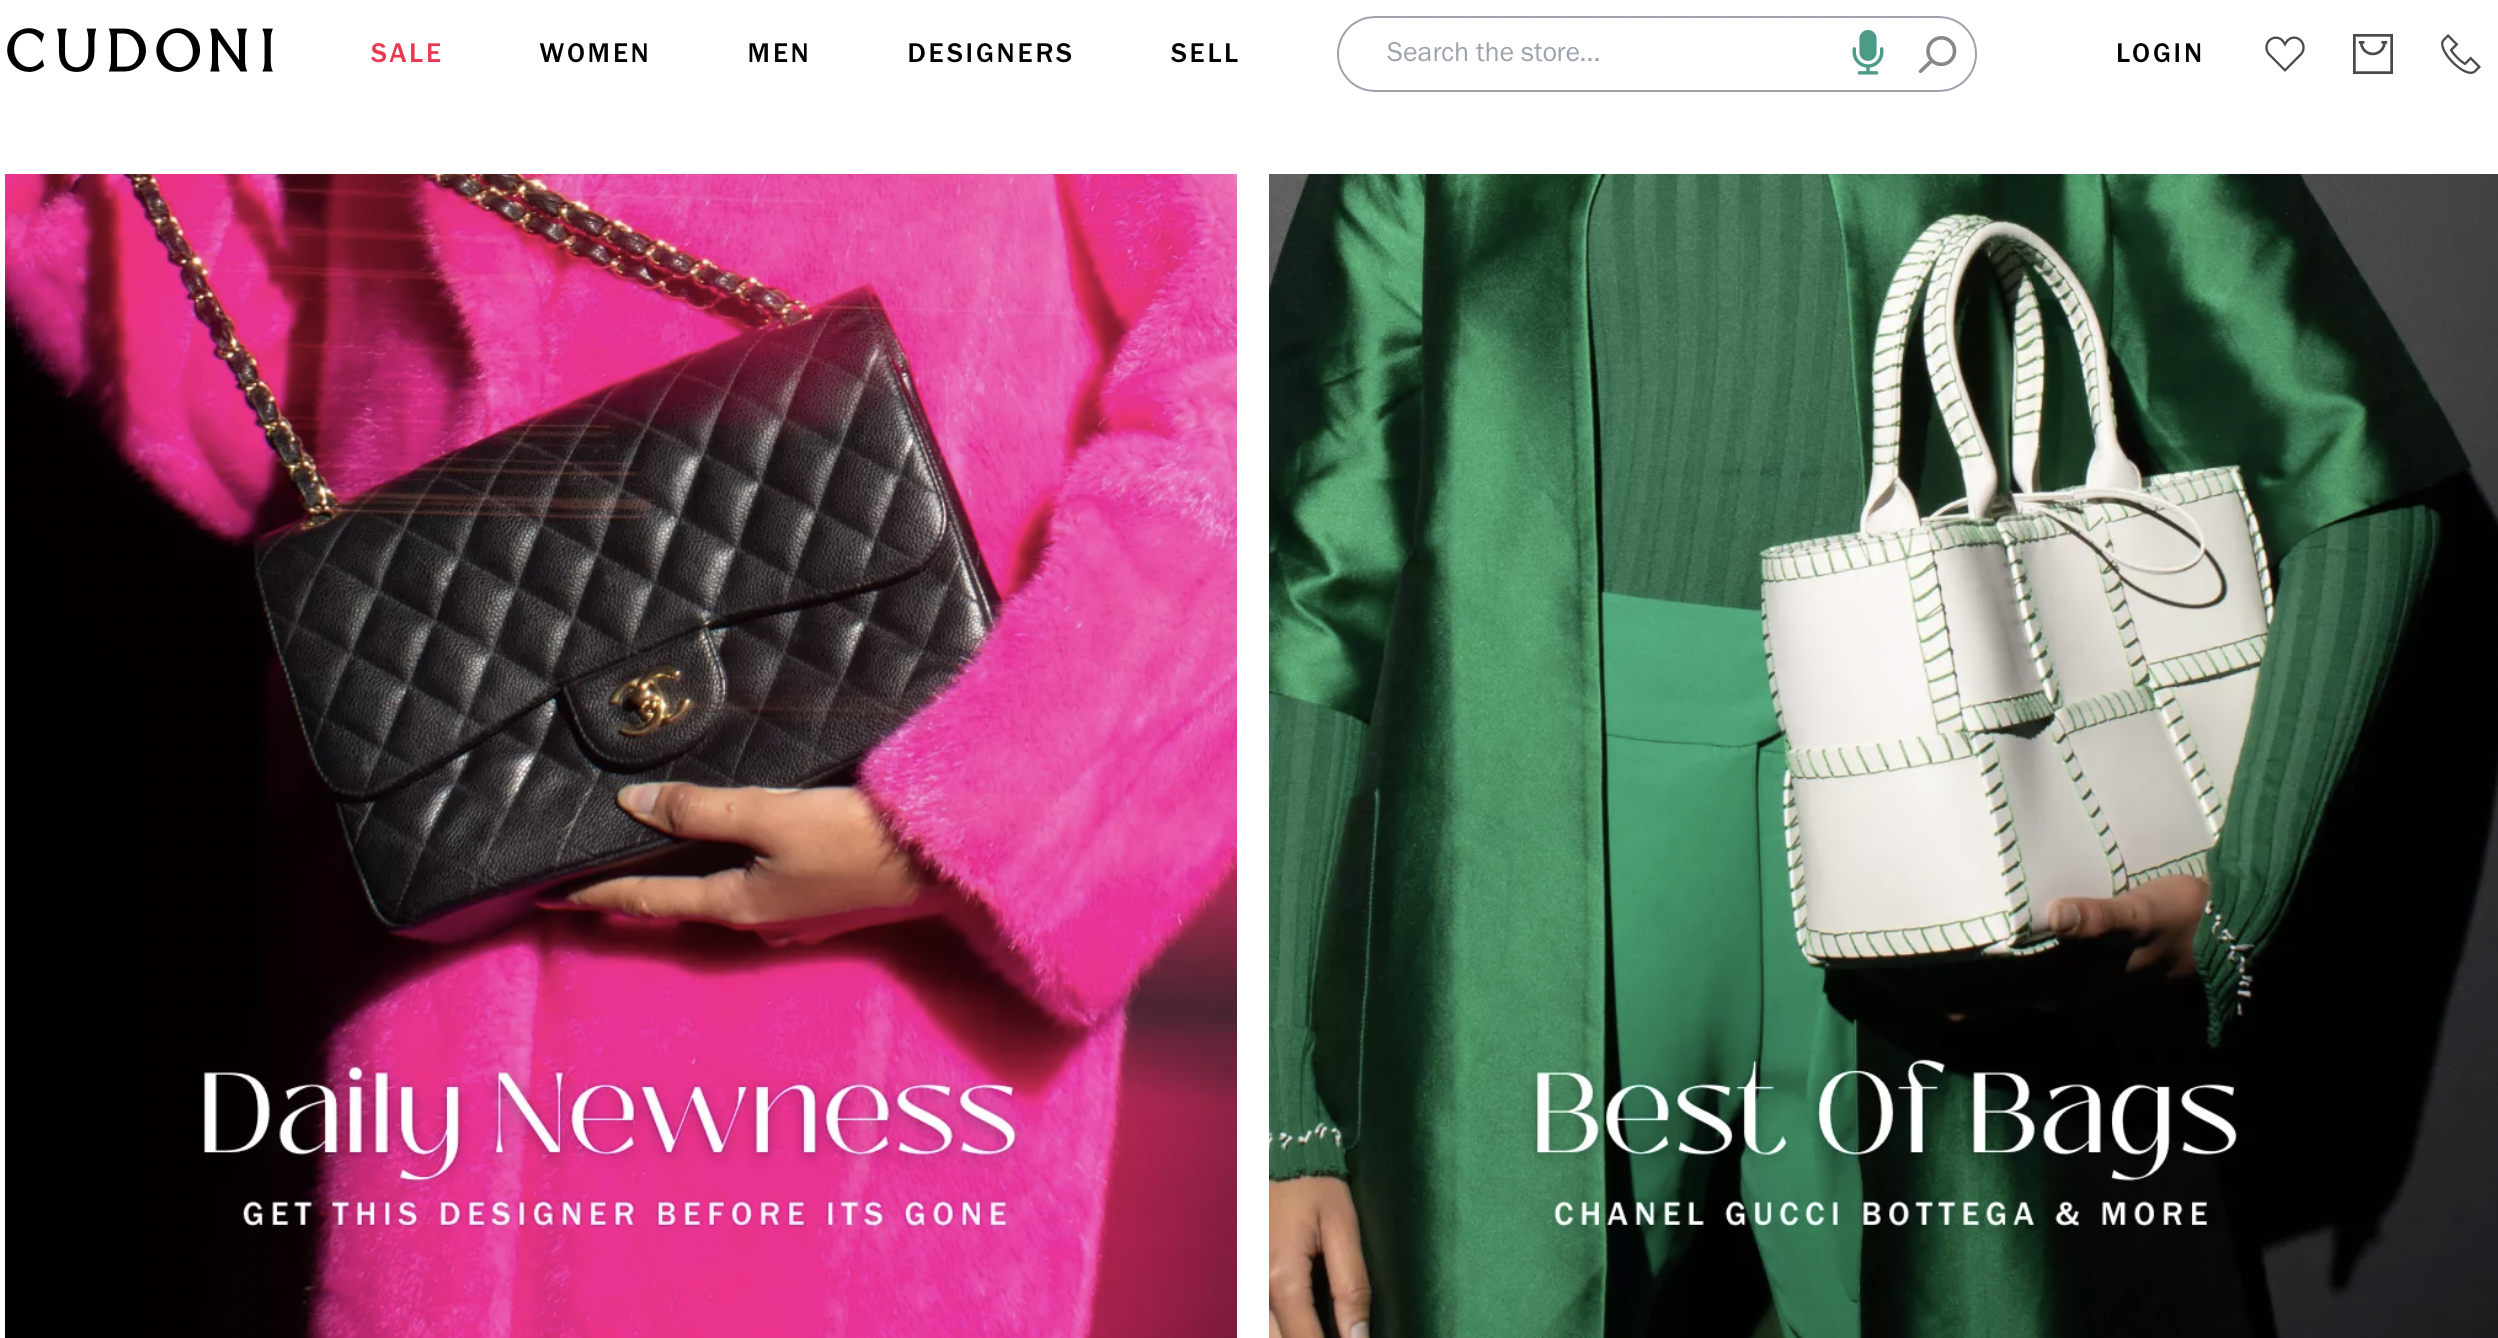 Second-Hand Luxury Resale Platform Cudoni Completes New Round of Financing at 7.5 Million Pounds With eBay’s Investment